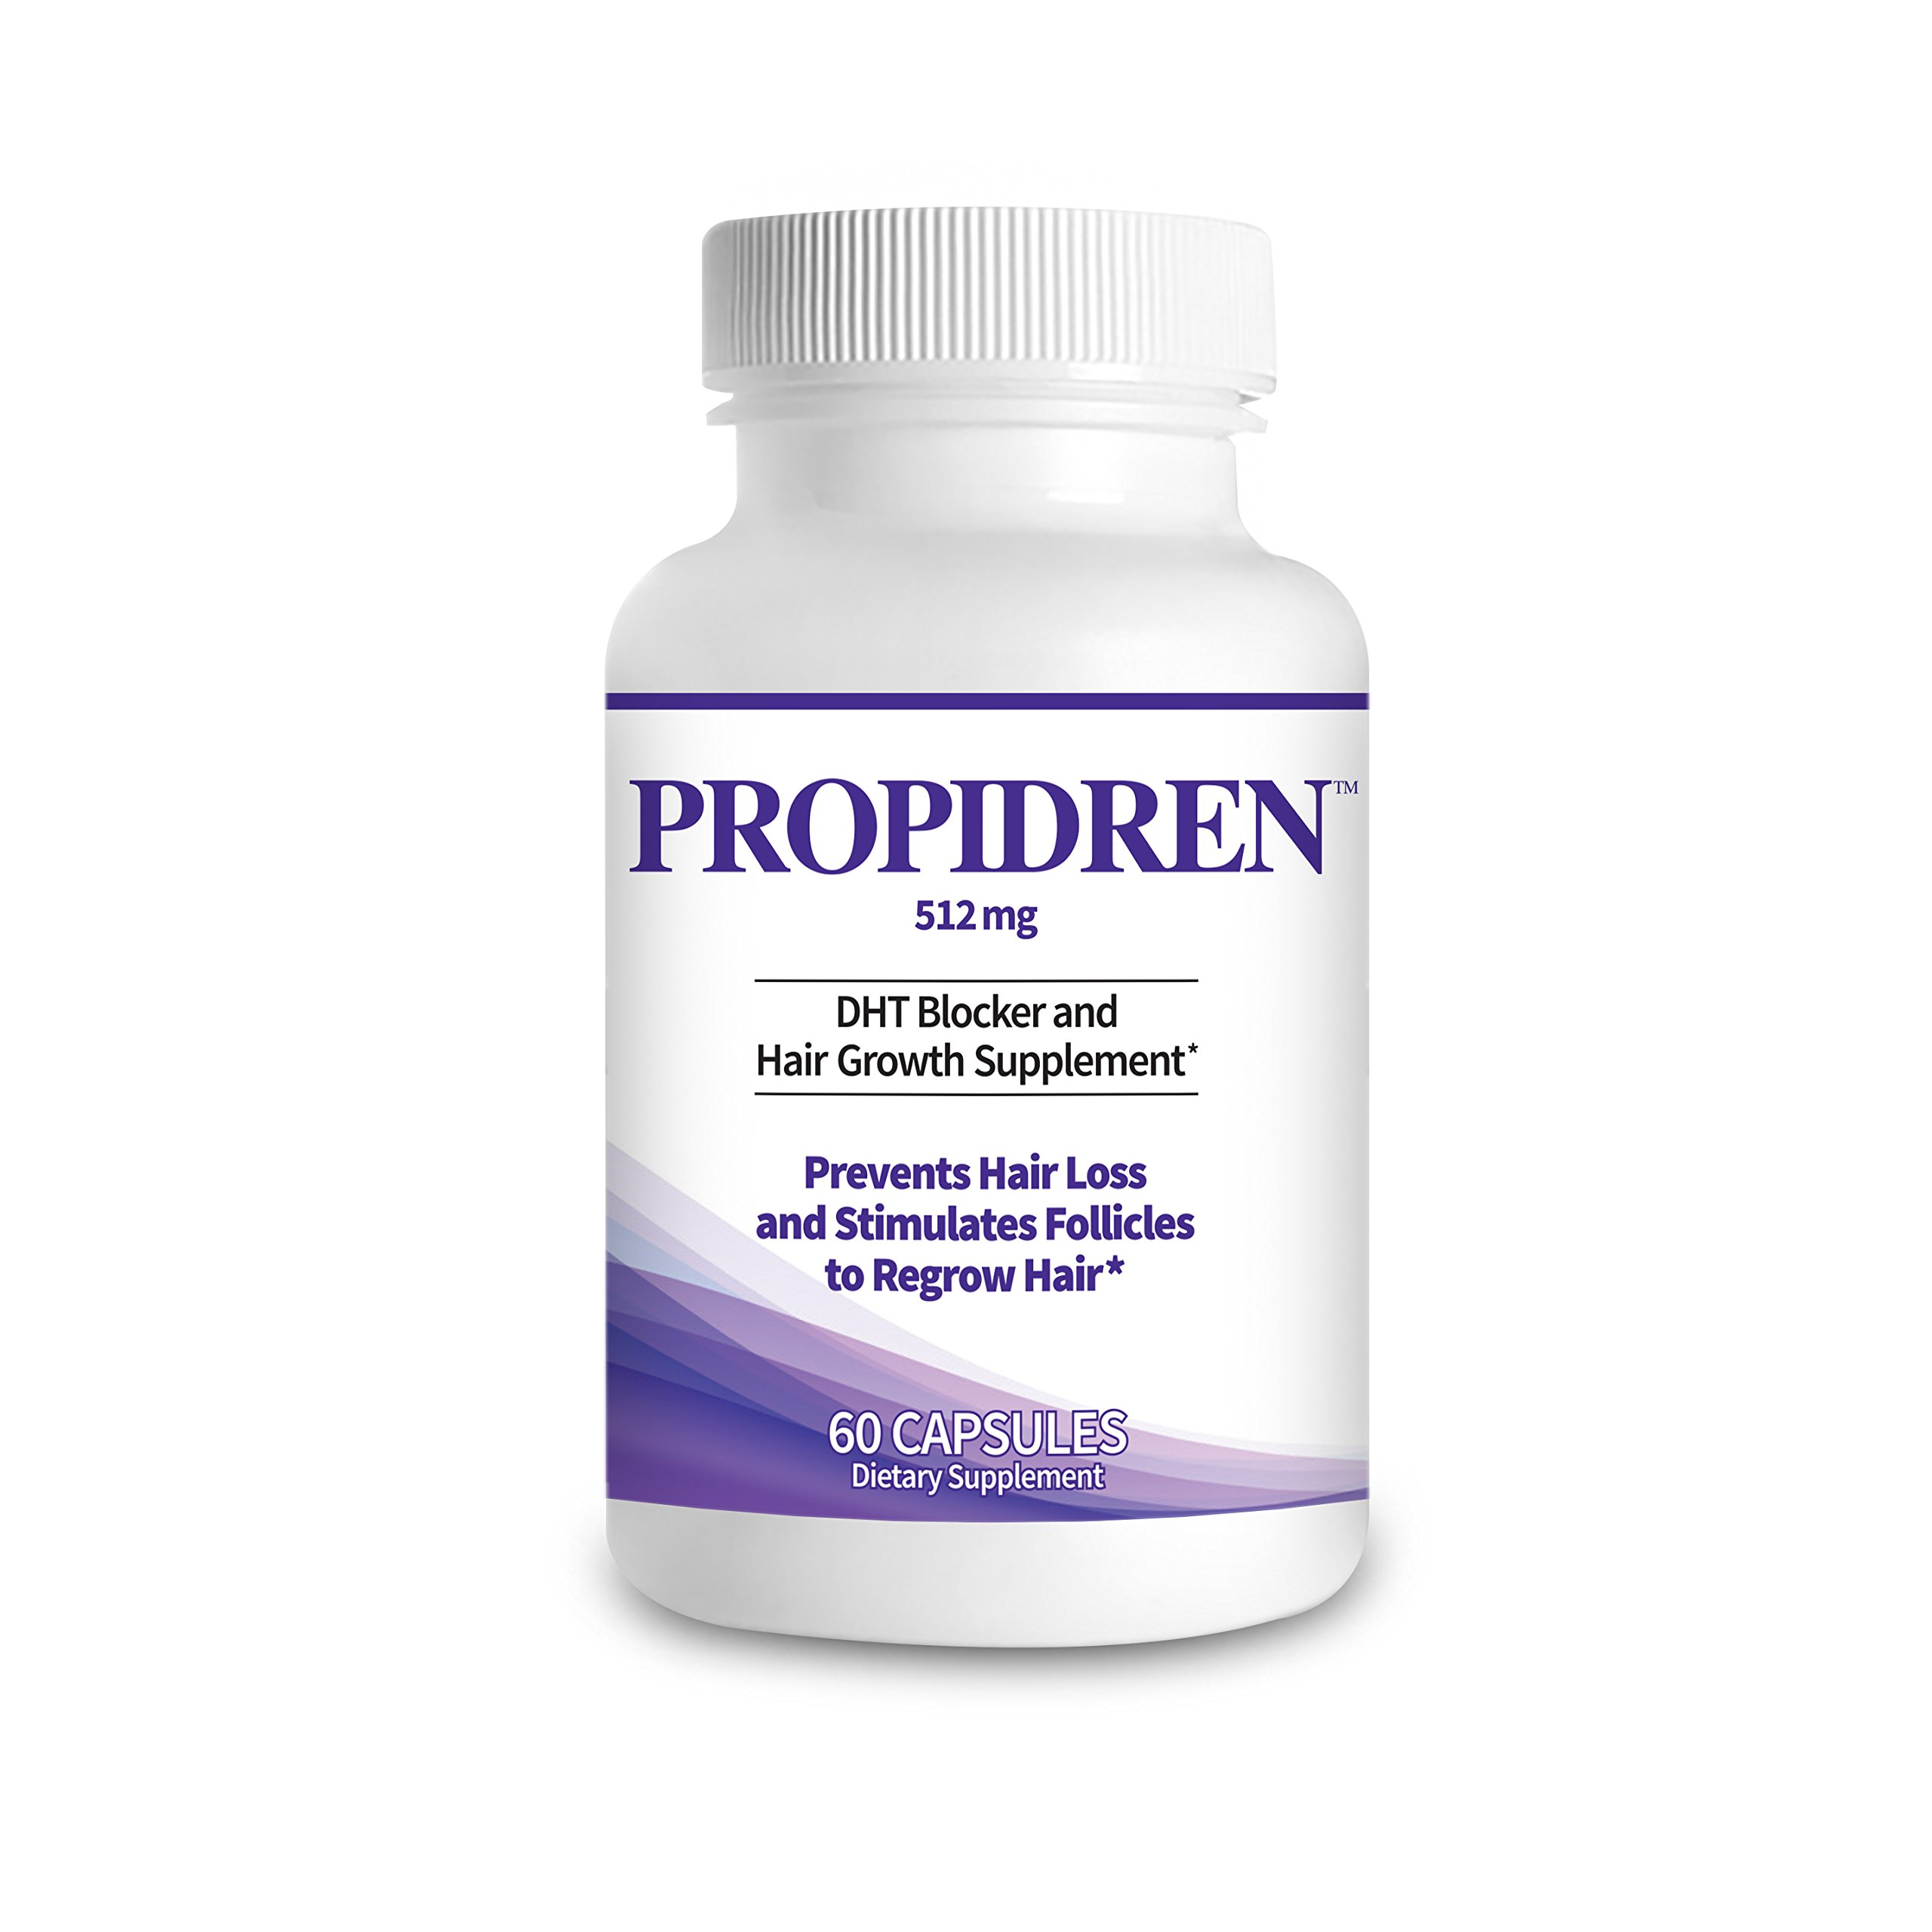 Mua Propidren by HairGenics - DHT Blocker with Saw Palmetto To Prevent Hair  Loss and Stimulate Hair Follicles to Stop Hair Loss and Regrow Hair. trên  Amazon Mỹ chính hãng 2023 | Giaonhan247